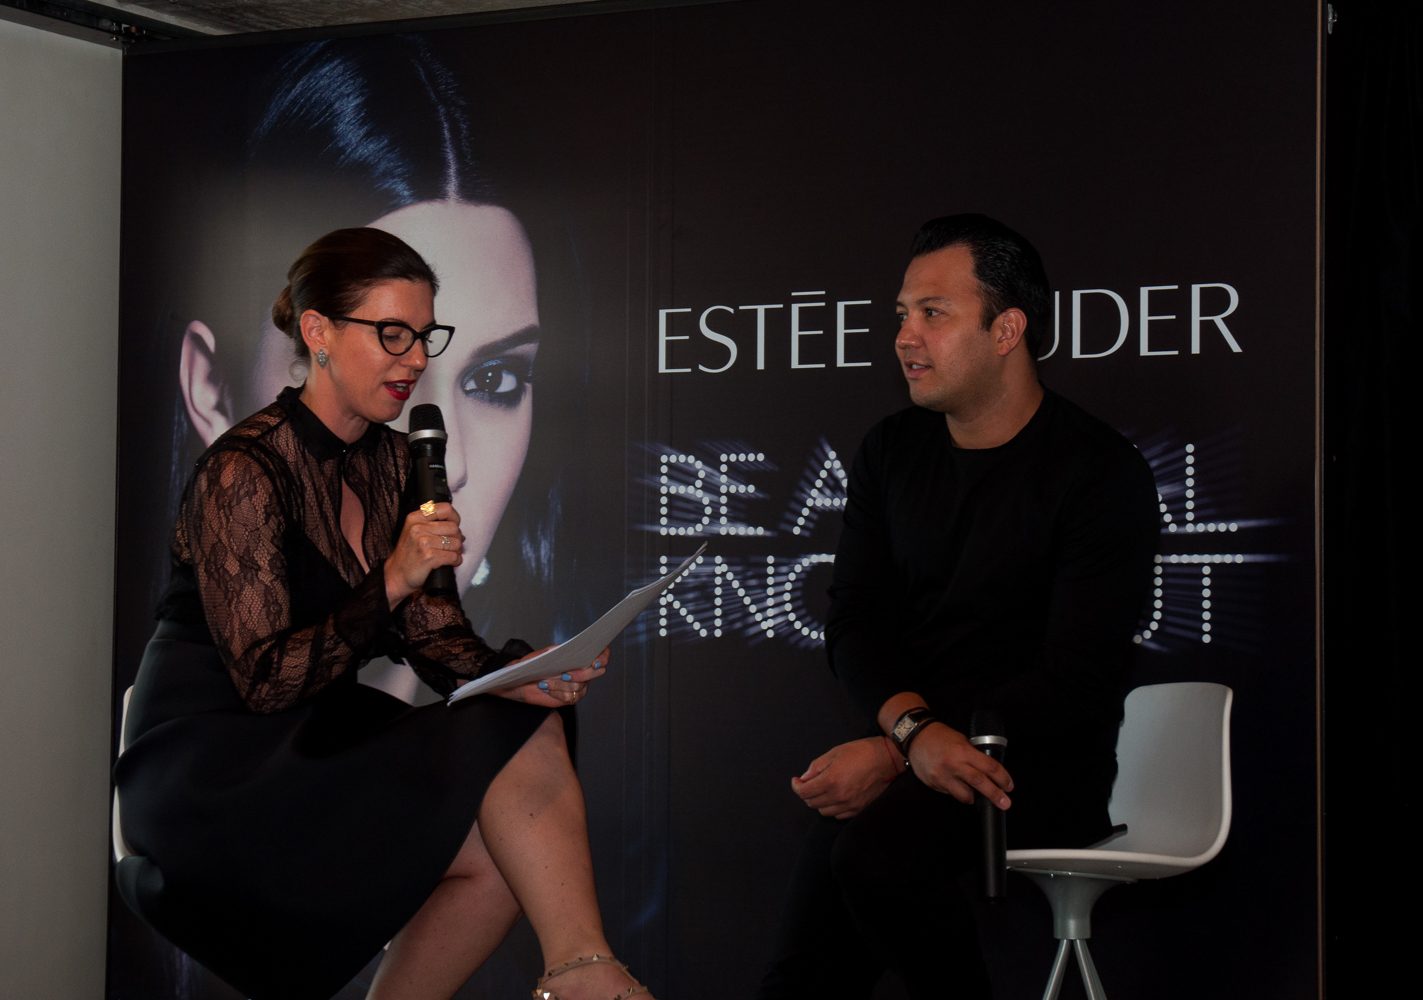 Fashion Quarterly editor Sally-Ann Mullin and Victor Henao during the Q&A session.